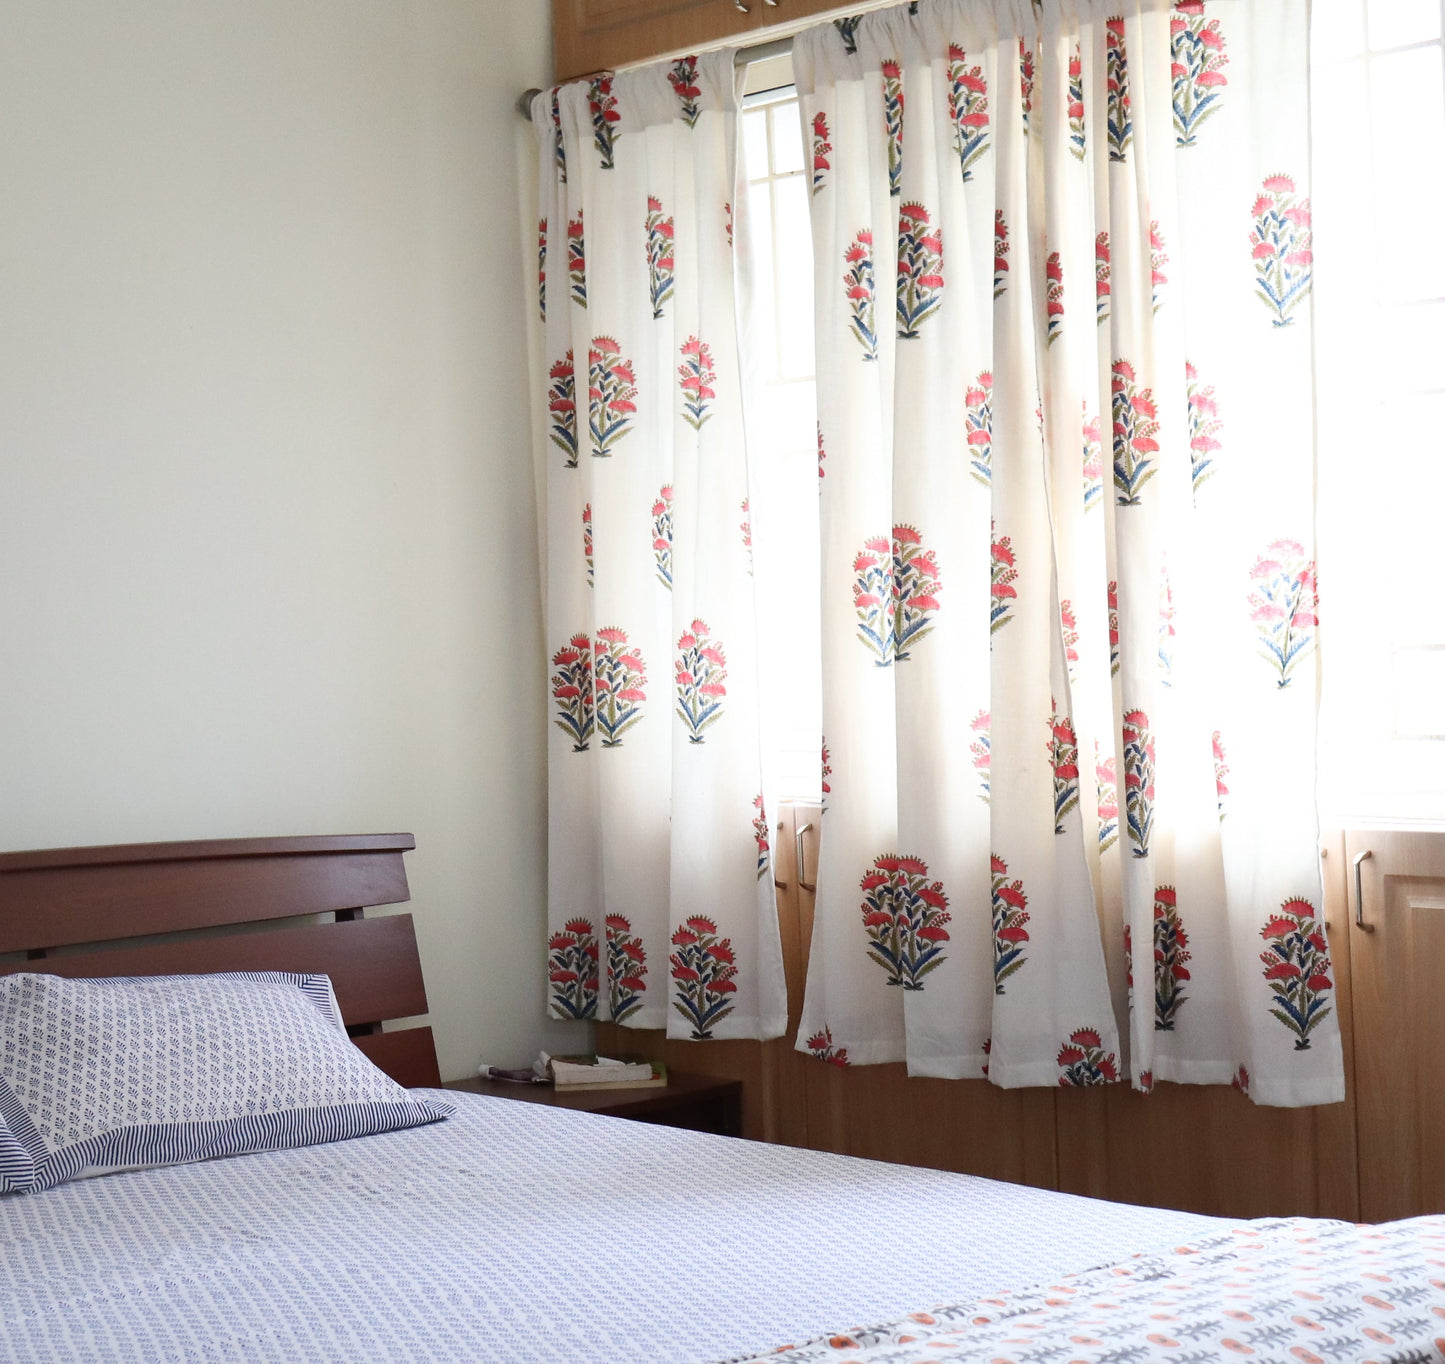 Rose bush curtains with lining - Cotton Linen - Sold individually